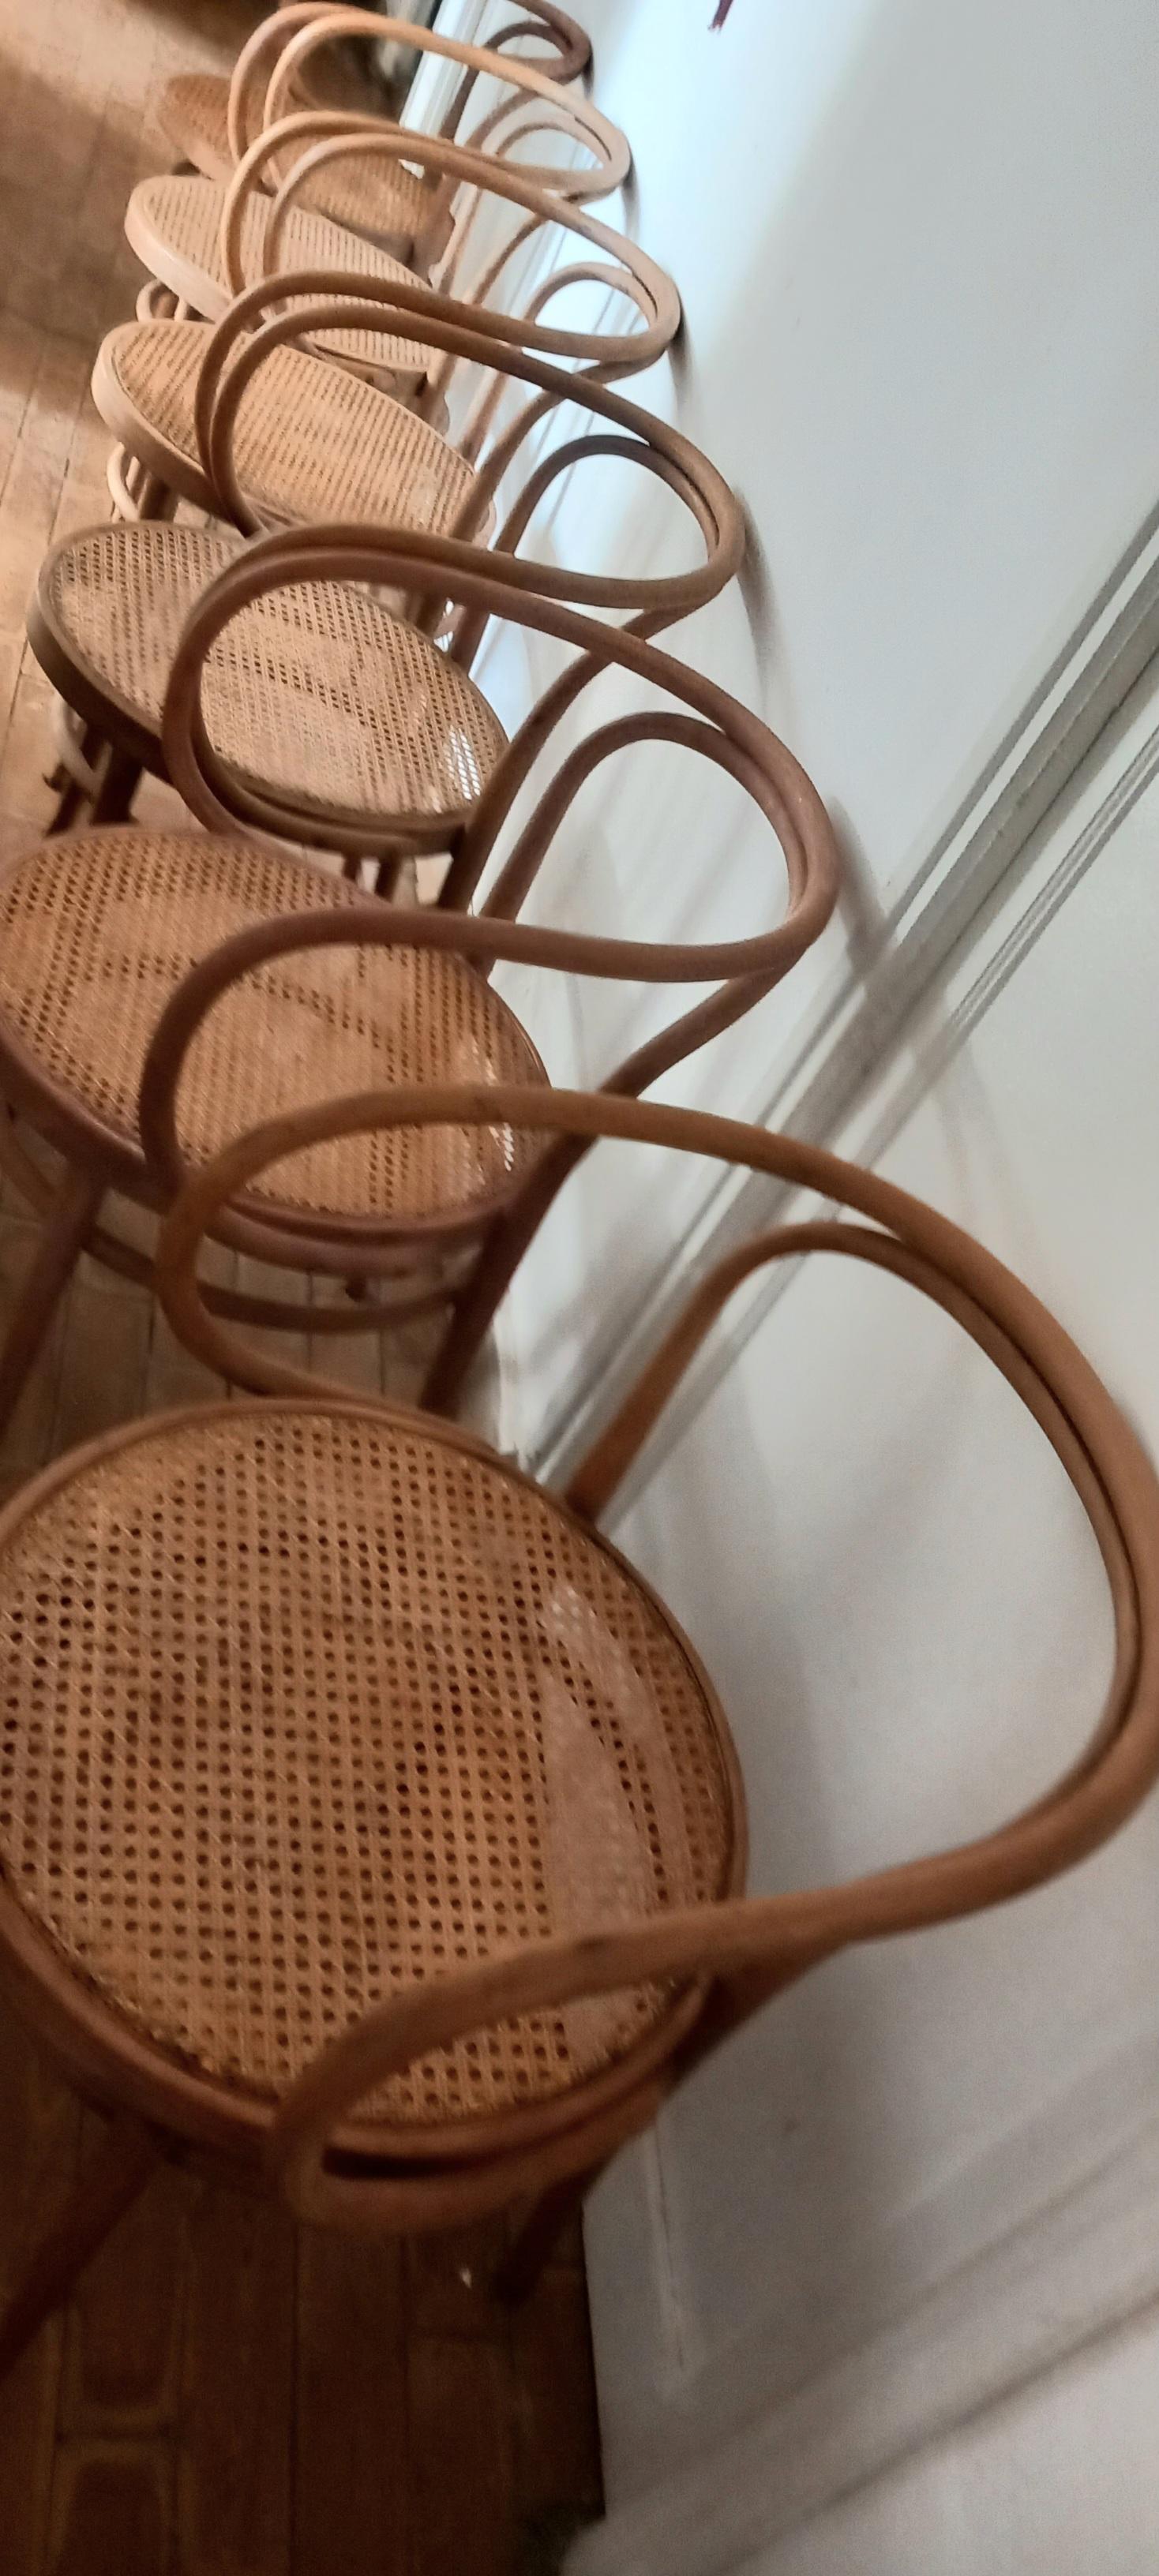 Thonet 209 Cane Bentwood Chairs After Thonet 209, 1950s For Sale 1